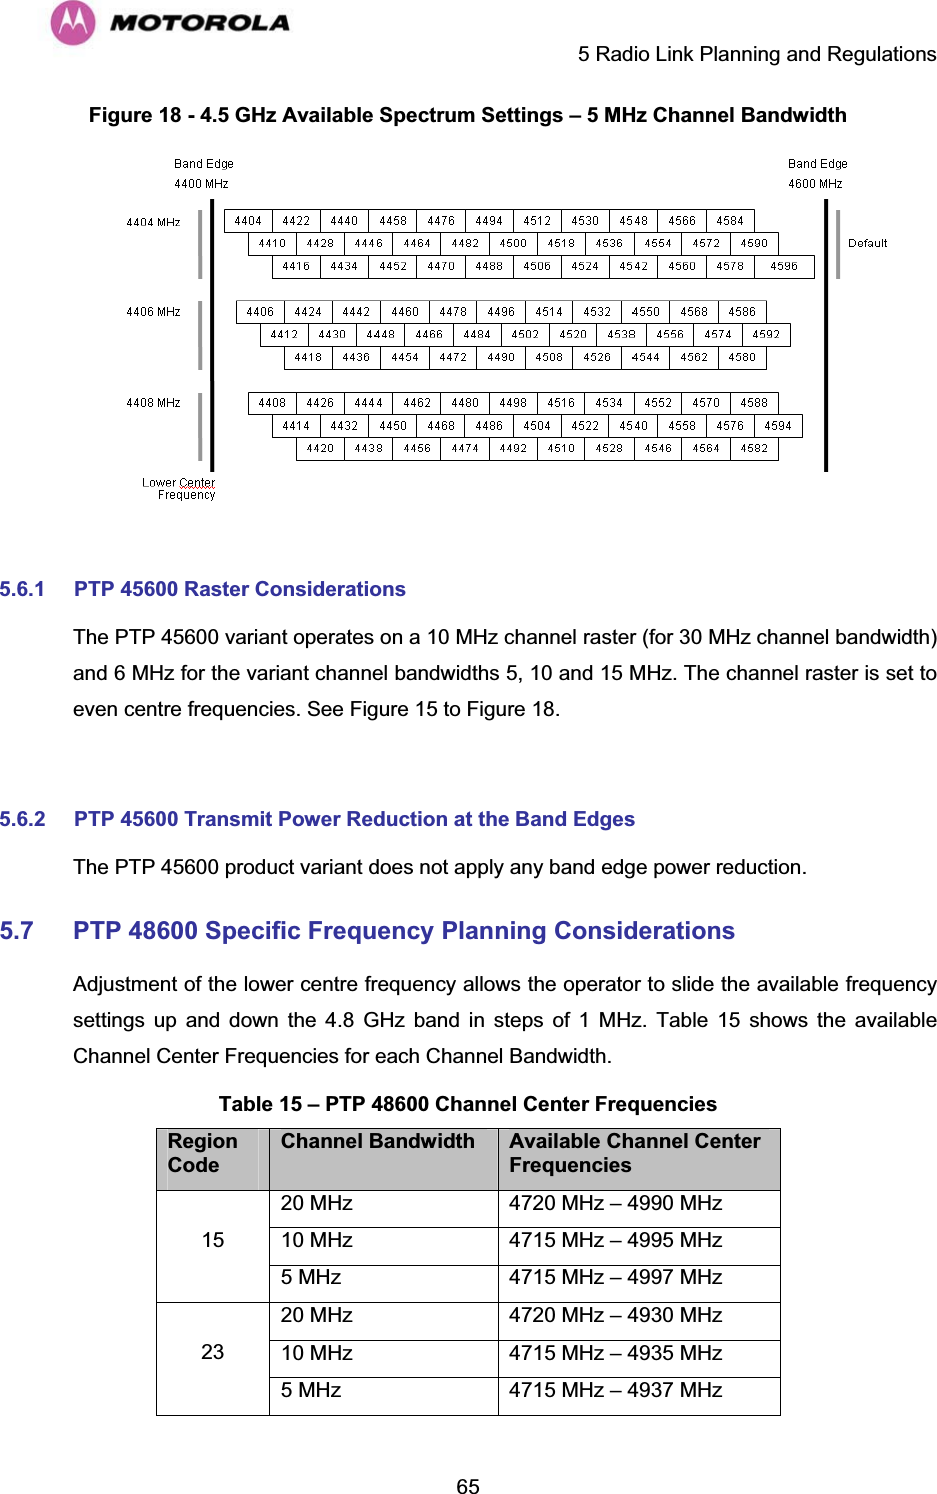     5 Radio Link Planning and Regulations  65Figure 18 - 4.5 GHz Available Spectrum Settings – 5 MHz Channel Bandwidth   5.6.1 PTP 45600 Raster Considerations The PTP 45600 variant operates on a 10 MHz channel raster (for 30 MHz channel bandwidth) and 6 MHz for the variant channel bandwidths 5, 10 and 15 MHz. The channel raster is set to even centre frequencies. See Figure 15 to Figure 18.  5.6.2 PTP 45600 Transmit Power Reduction at the Band Edges The PTP 45600 product variant does not apply any band edge power reduction. 5.7 PTP 48600 Specific Frequency Planning Considerations Adjustment of the lower centre frequency allows the operator to slide the available frequency settings up and down the 4.8 GHz band in steps of 1 MHz. Table 15 shows the available Channel Center Frequencies for each Channel Bandwidth. Table 15 – PTP 48600 Channel Center Frequencies RegionCodeChannel Bandwidth  Available Channel Center Frequencies 20 MHz  4720 MHz – 4990 MHz 10 MHz  4715 MHz – 4995 MHz 15 5 MHz  4715 MHz – 4997 MHz 20 MHz  4720 MHz – 4930 MHz 10 MHz  4715 MHz – 4935 MHz 23 5 MHz  4715 MHz – 4937 MHz 